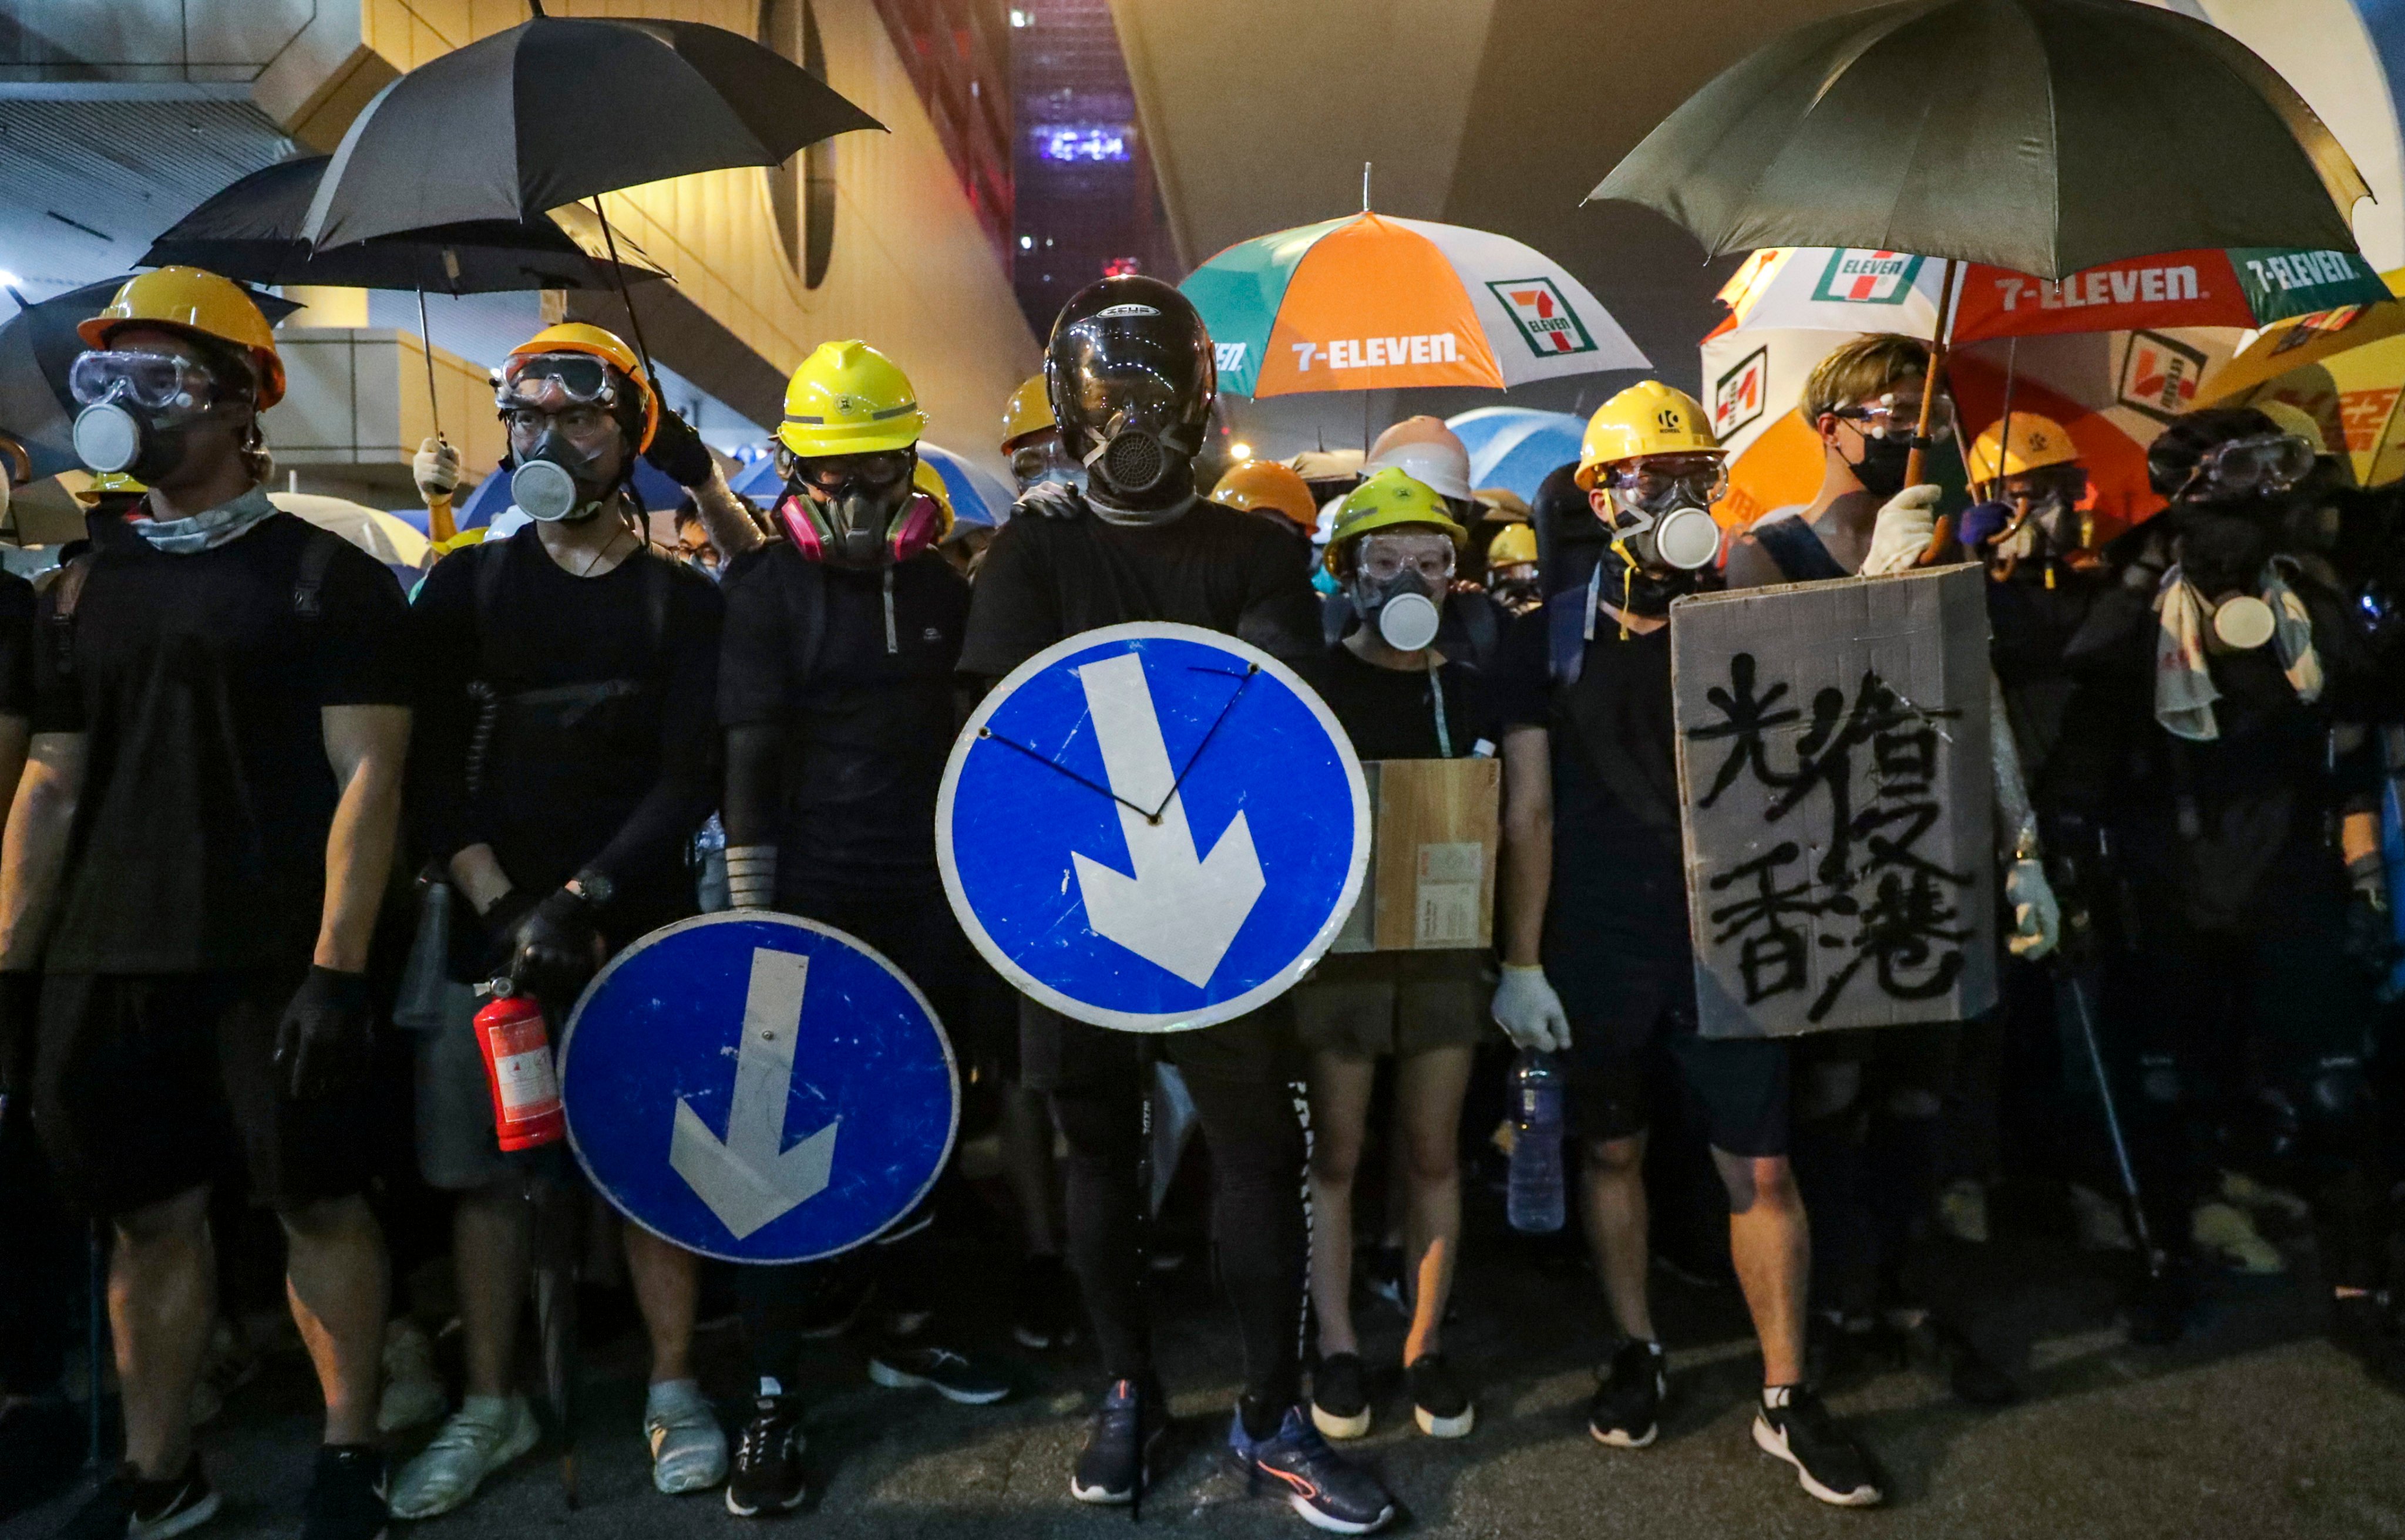 Protesters in Central during the 2019 social unrest. Photo: Edmond So